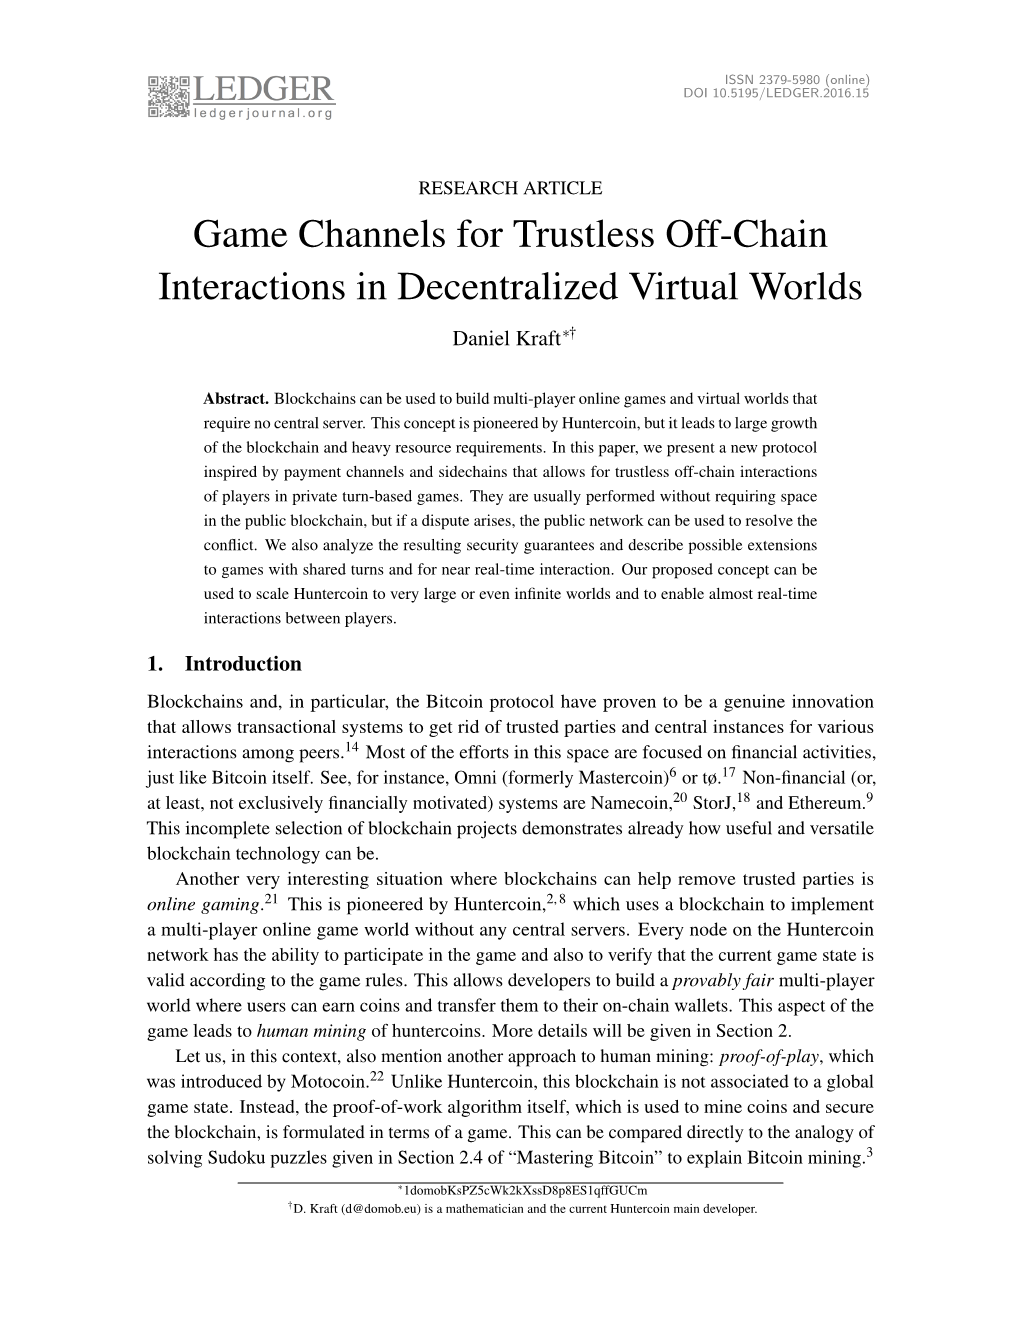 Game Channels for Trustless Off-Chain Interactions in Decentralized Virtual Worlds Daniel Kraft∗†